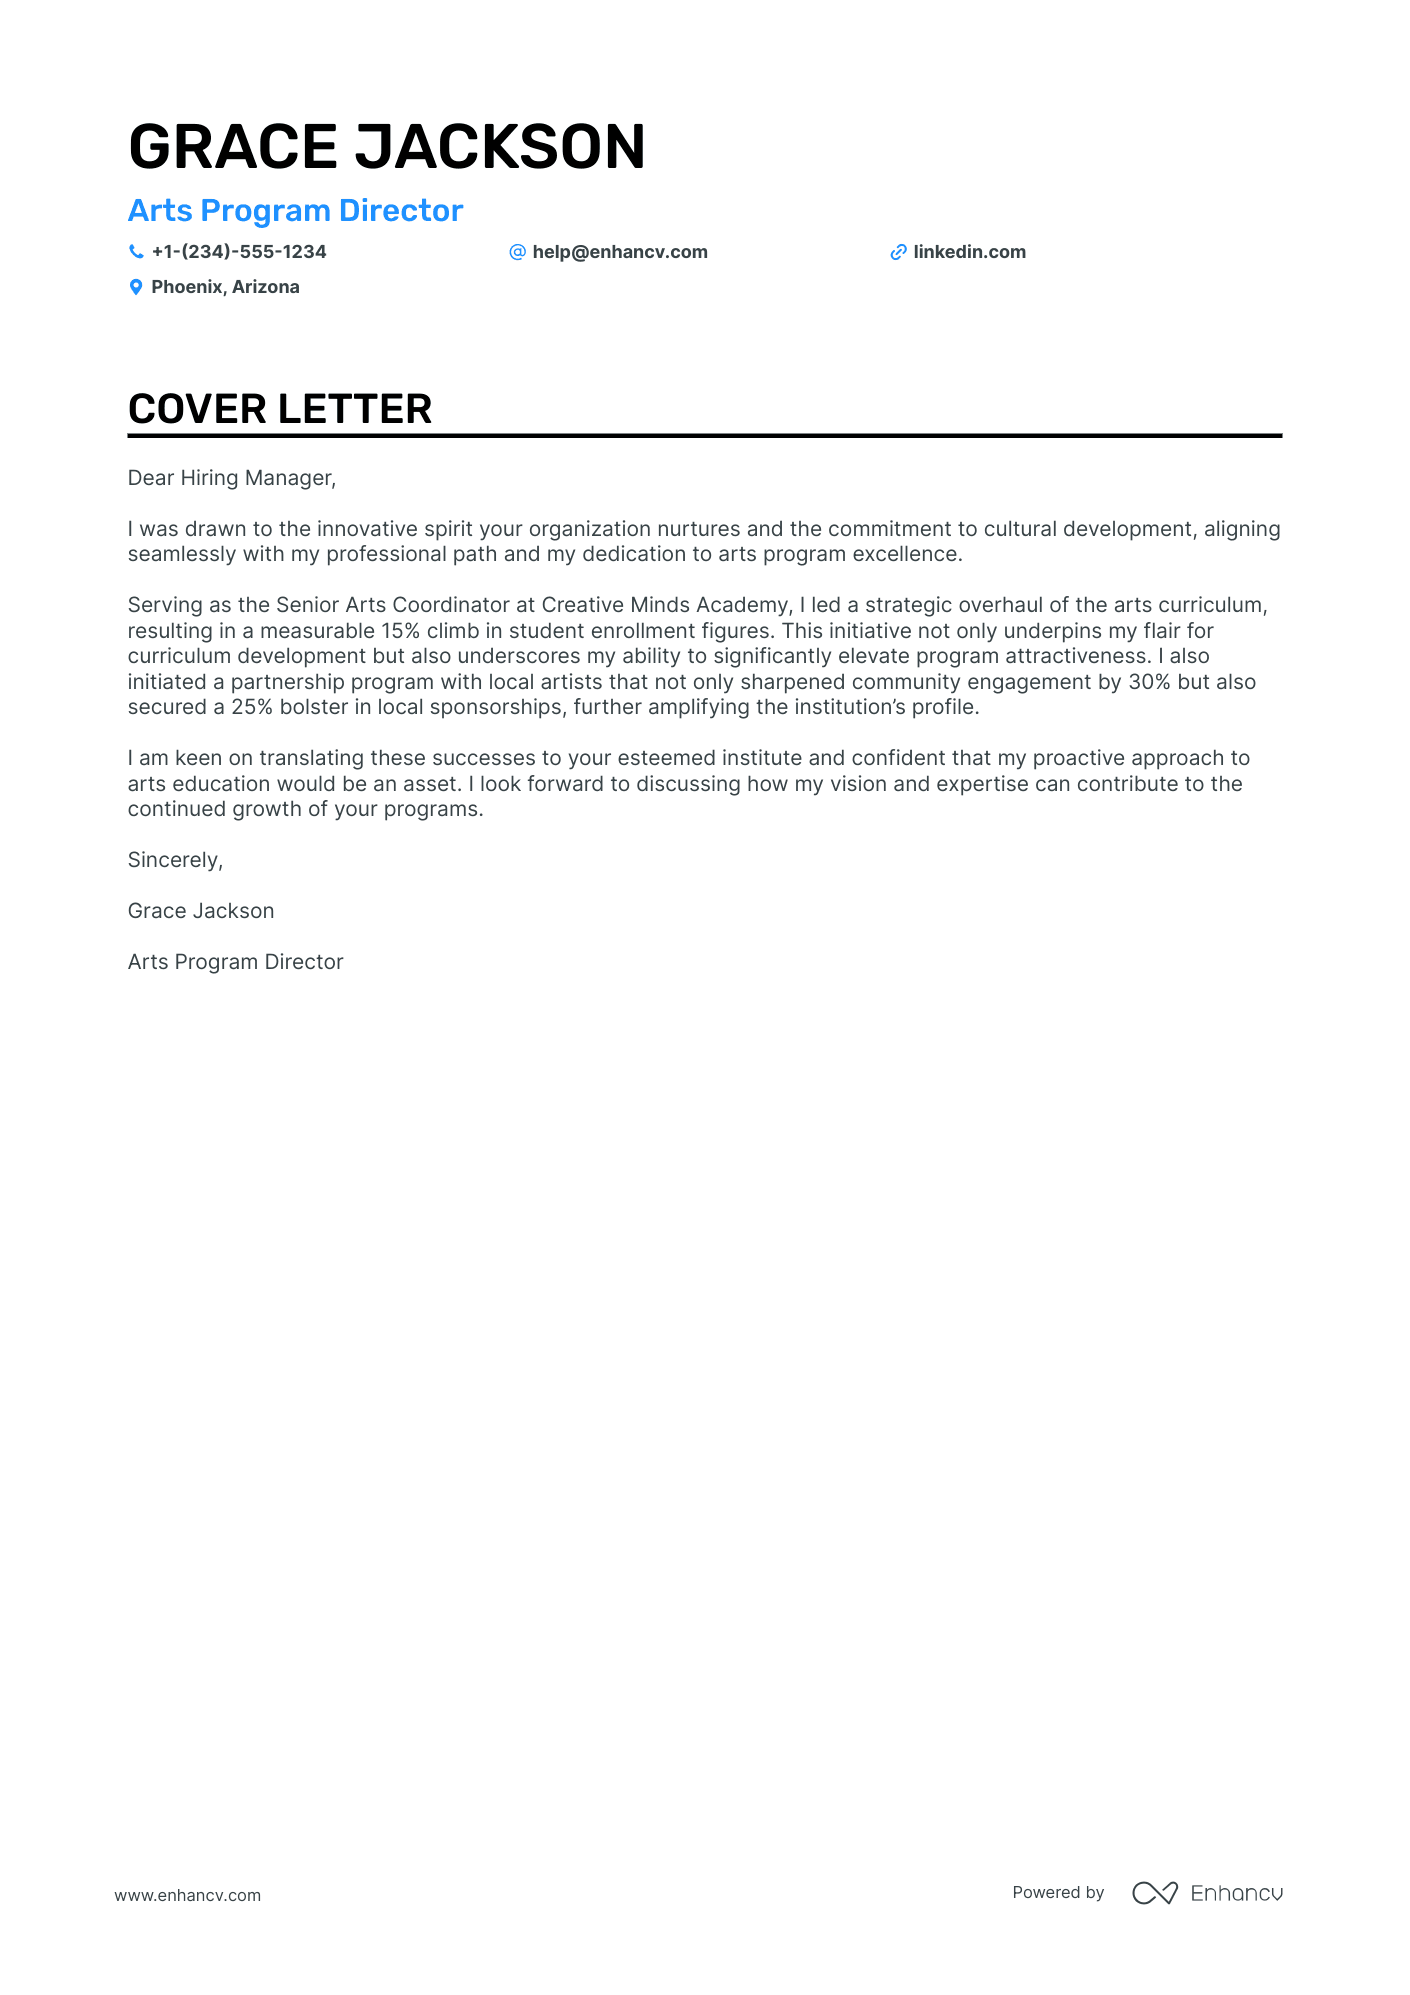 Artistic Director cover letter